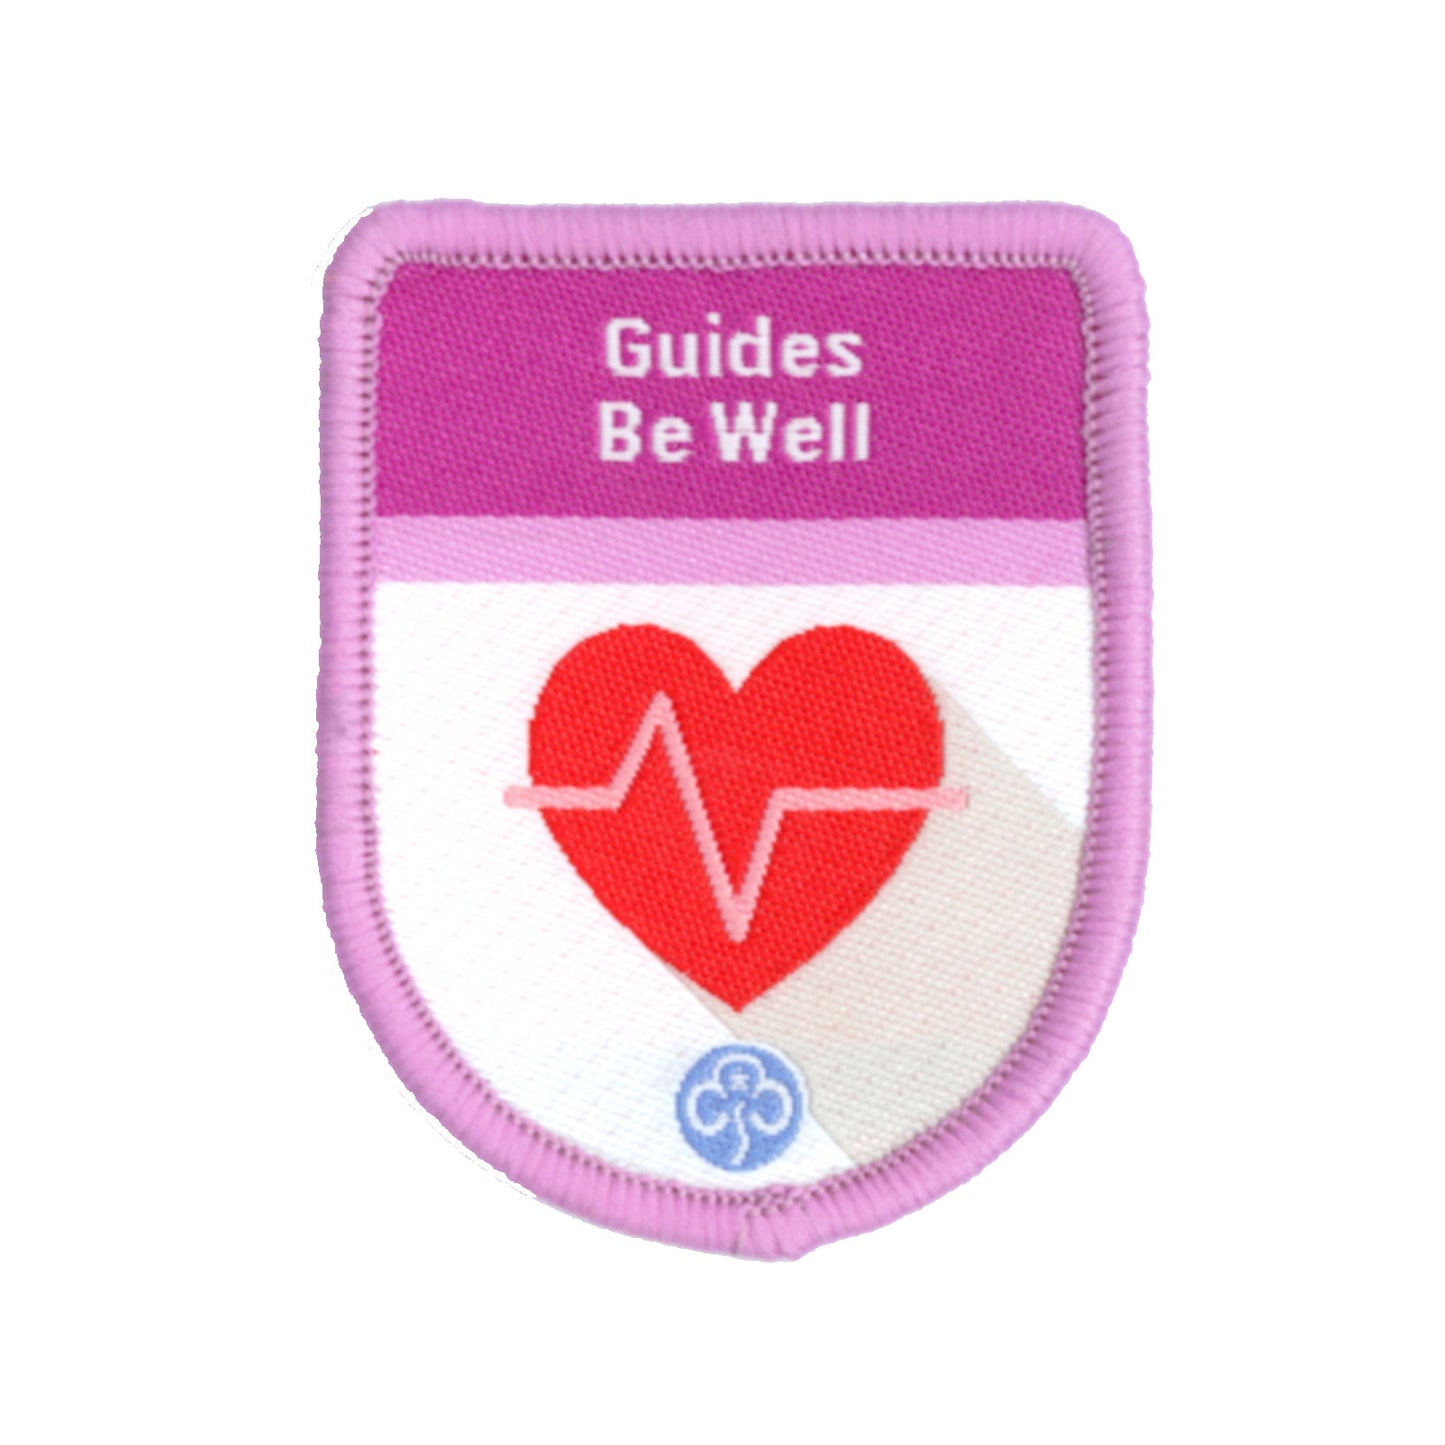 Guides Be Well Theme Award Woven Badge